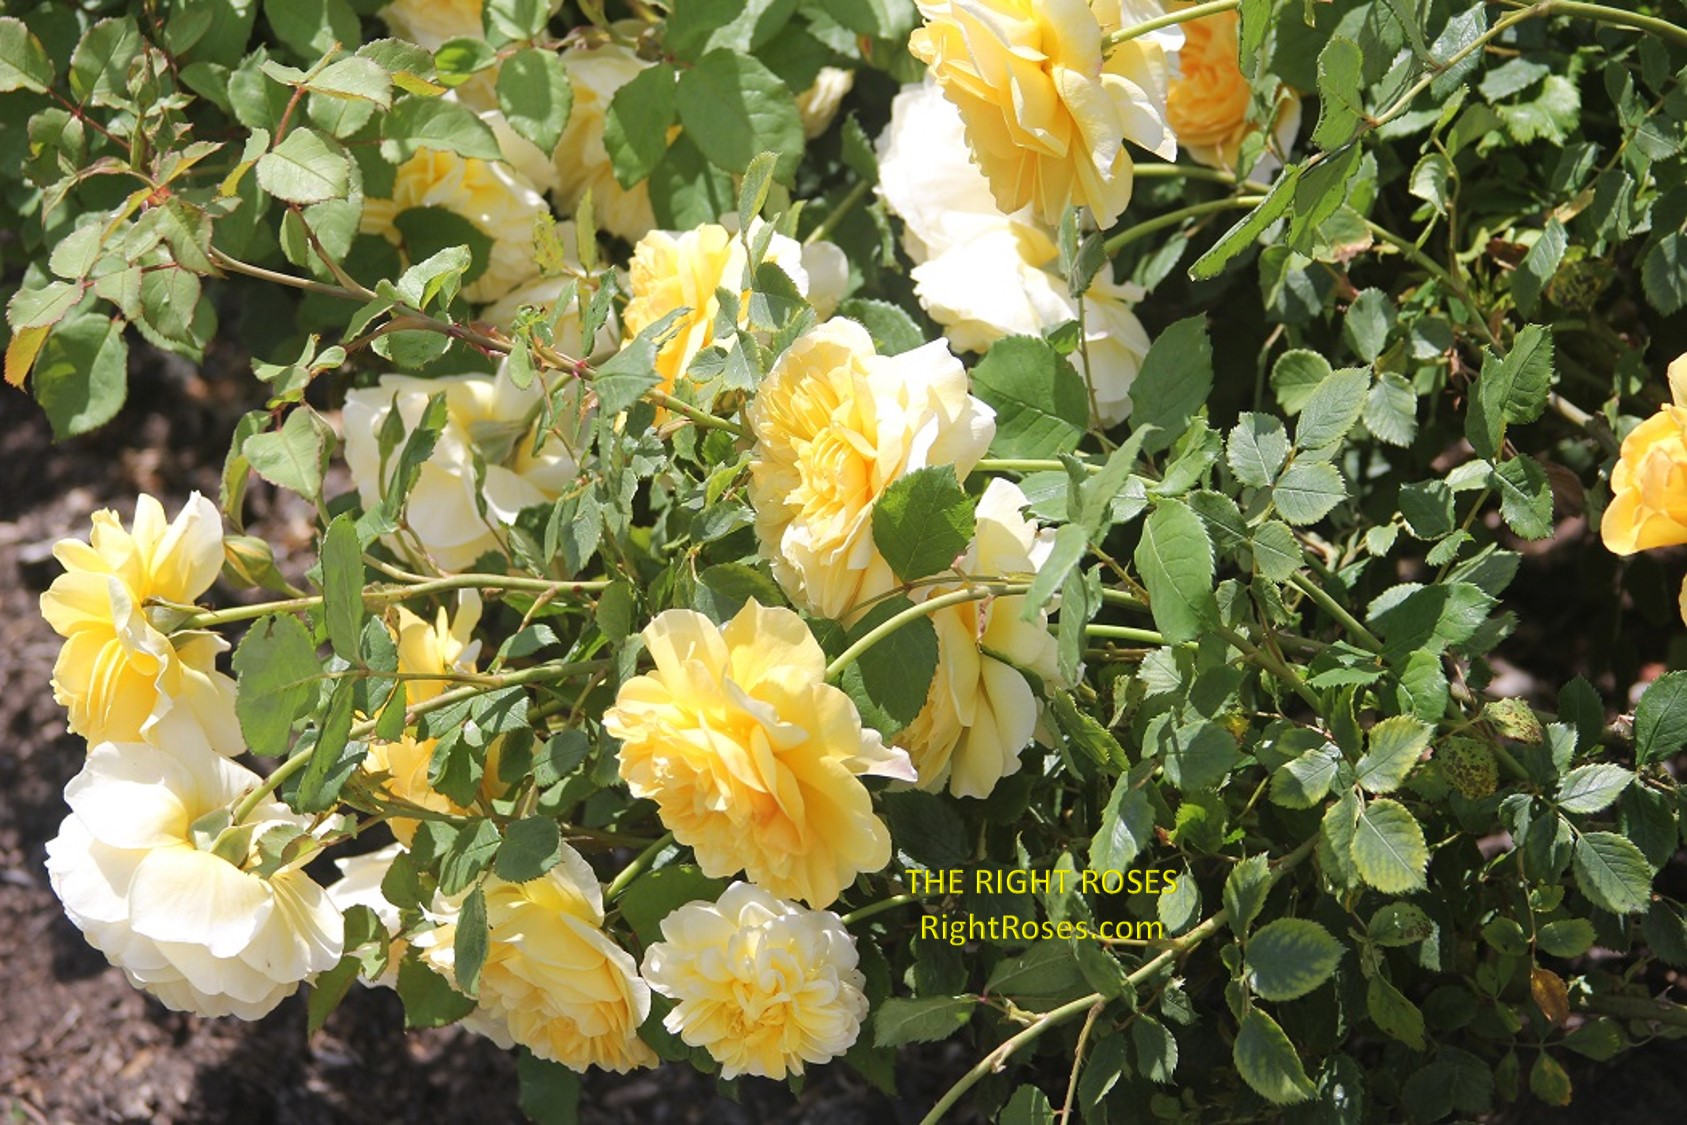 the poet's wife rose review the right roses score best top garden store david austin english roses rose products rose rating the right leap rose food fertilizer